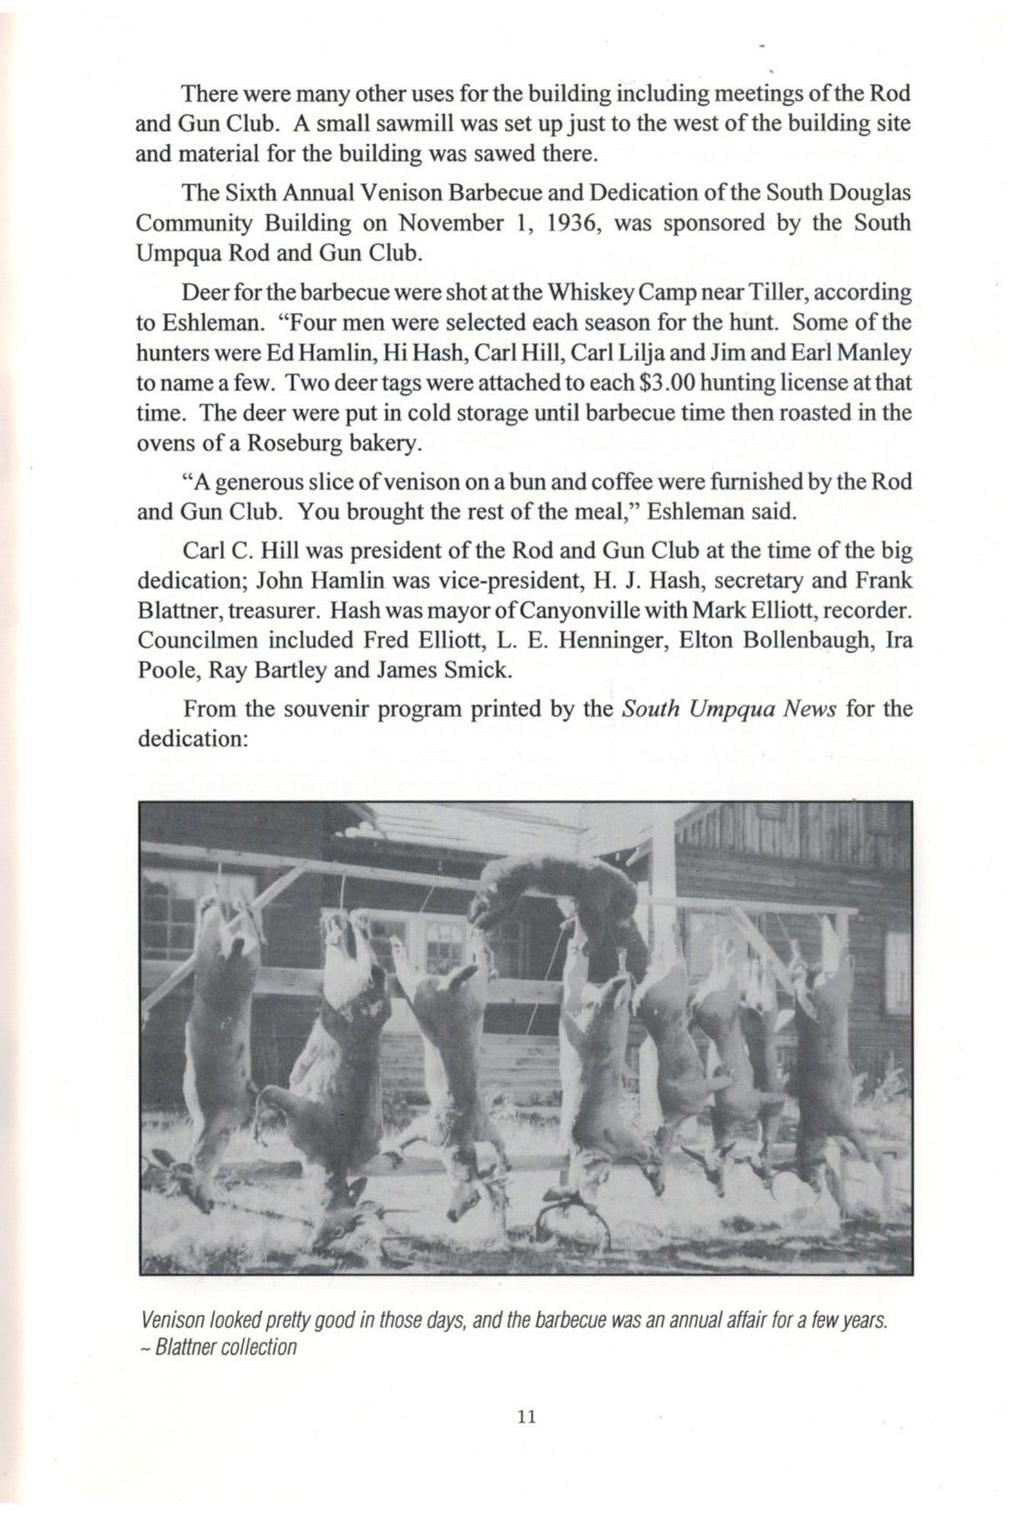 (Continued story about the South Umpqua Rod and Gun Club Our Page 2) Reprinted with permission of The South Umpqua Historical Society, Inc., Canyonville, Oregon.